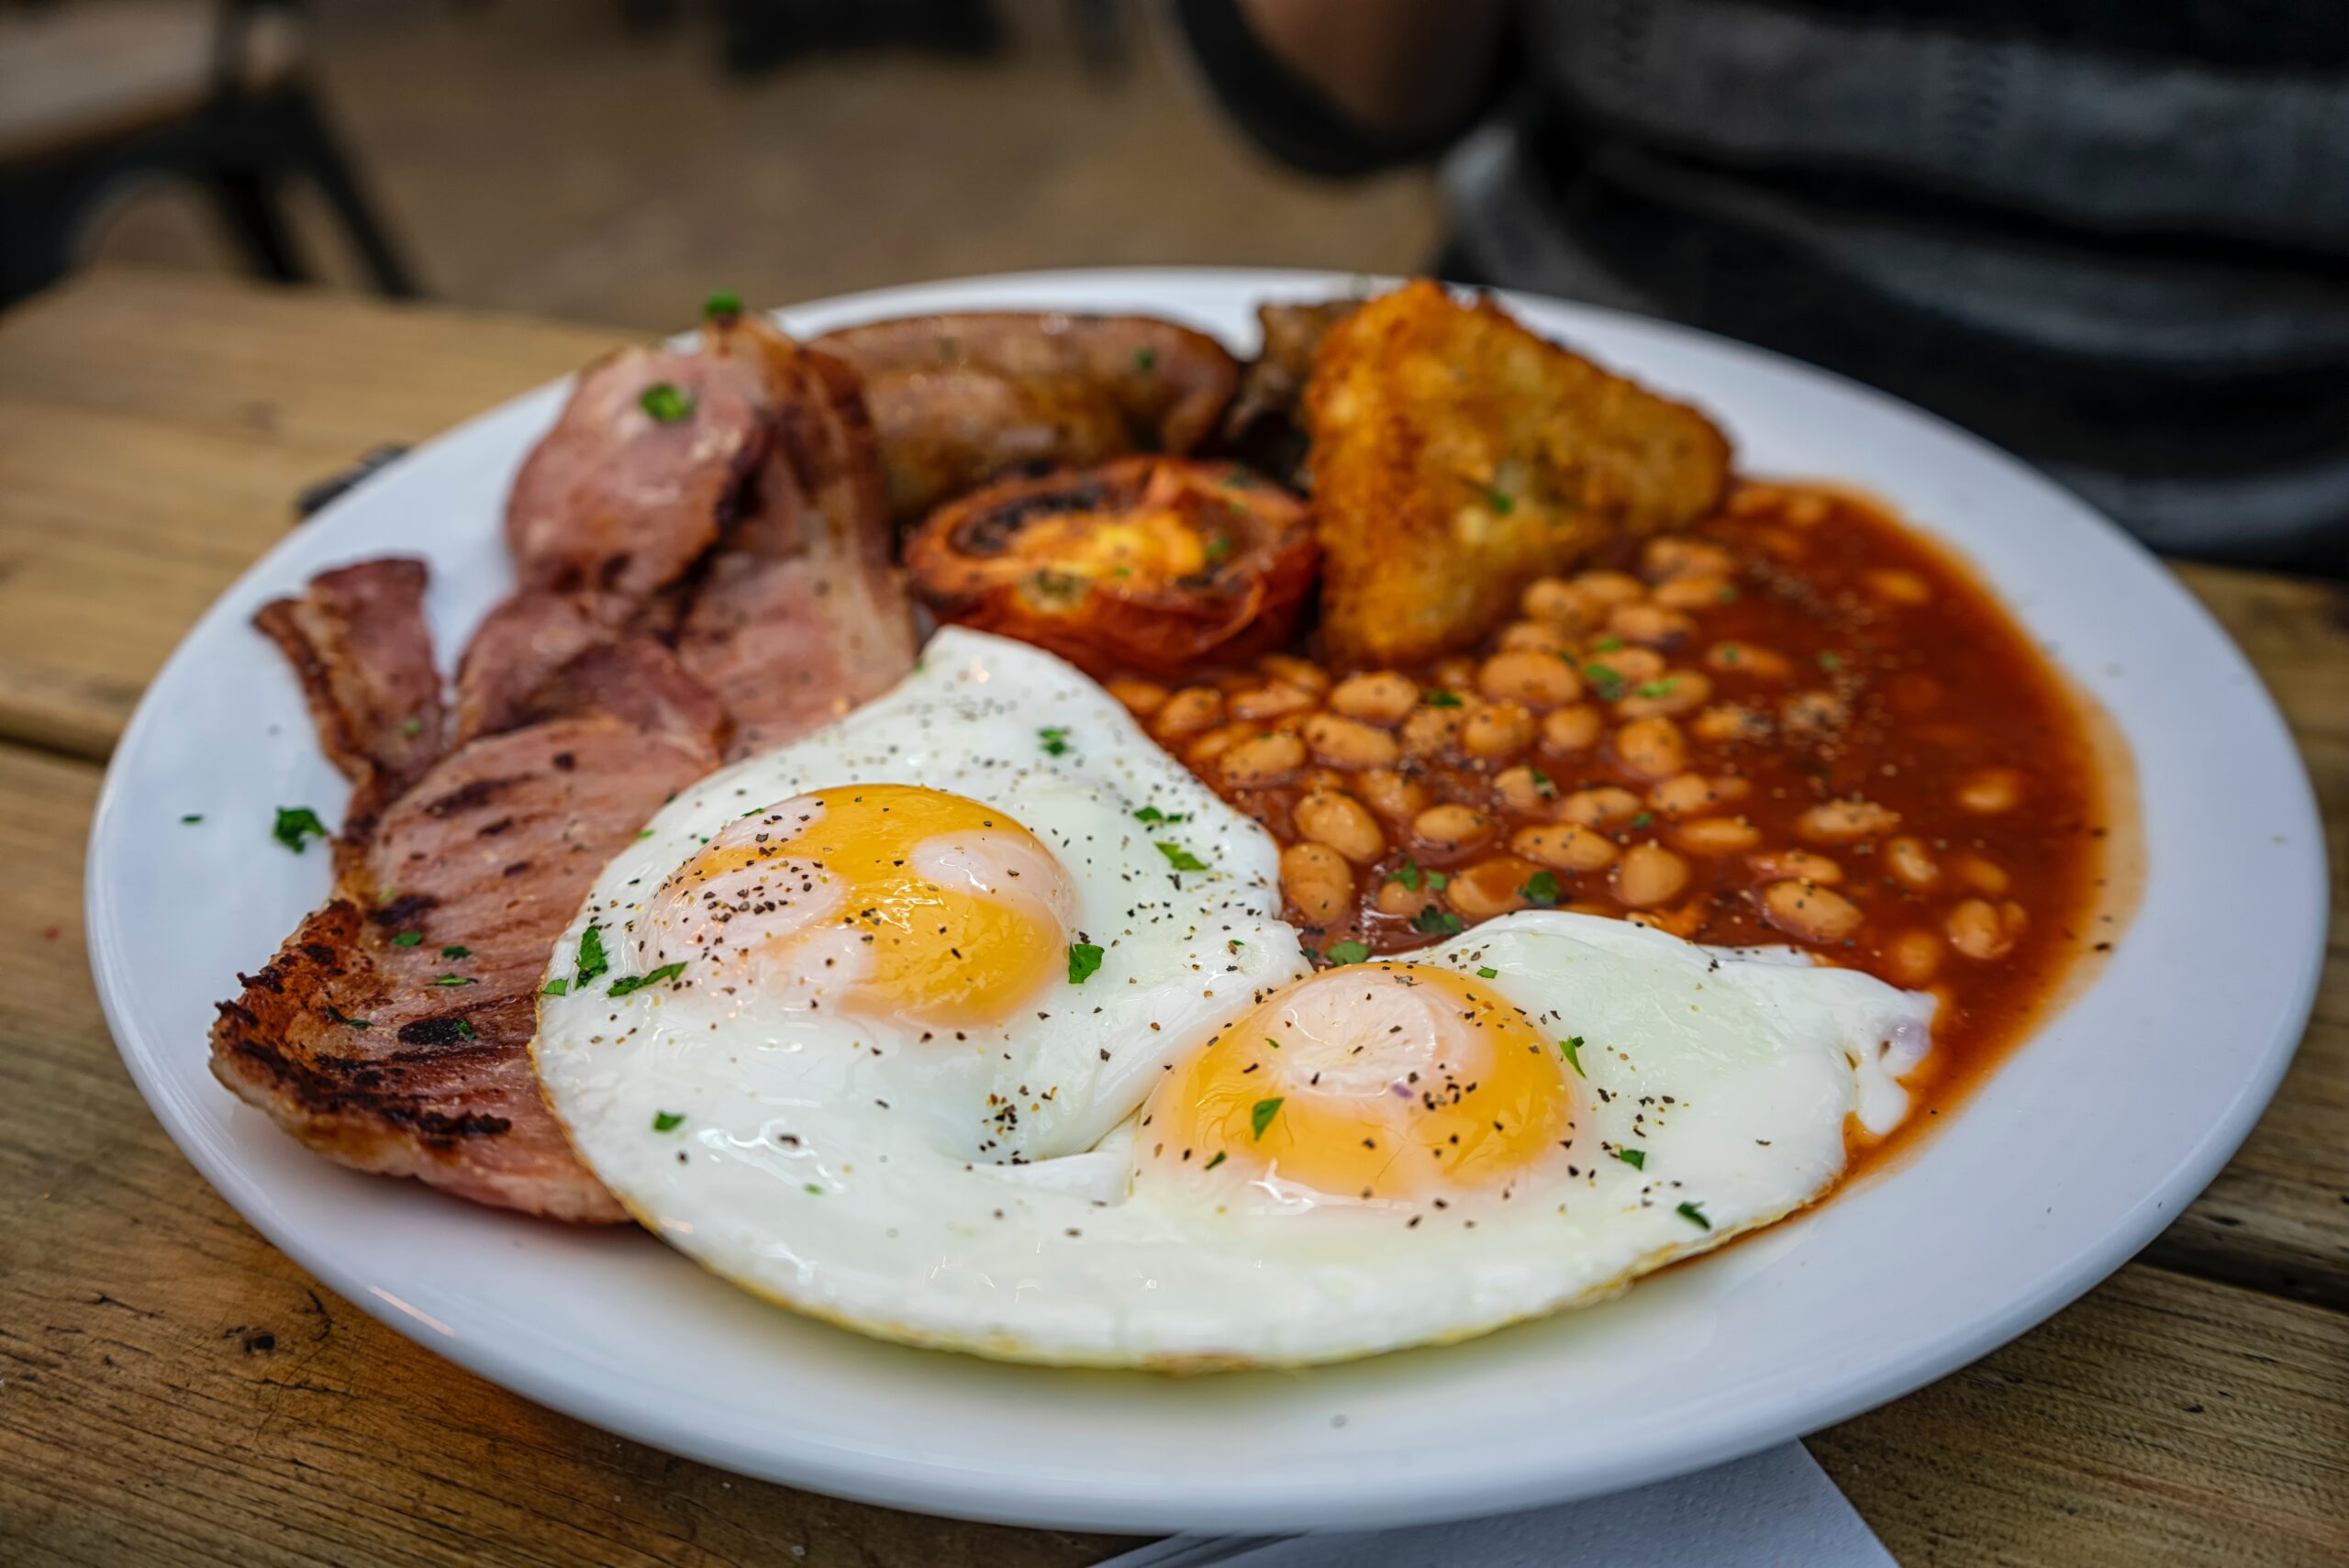 Full english breakfast with fired eggs, bacon, beans, and tomatpoes